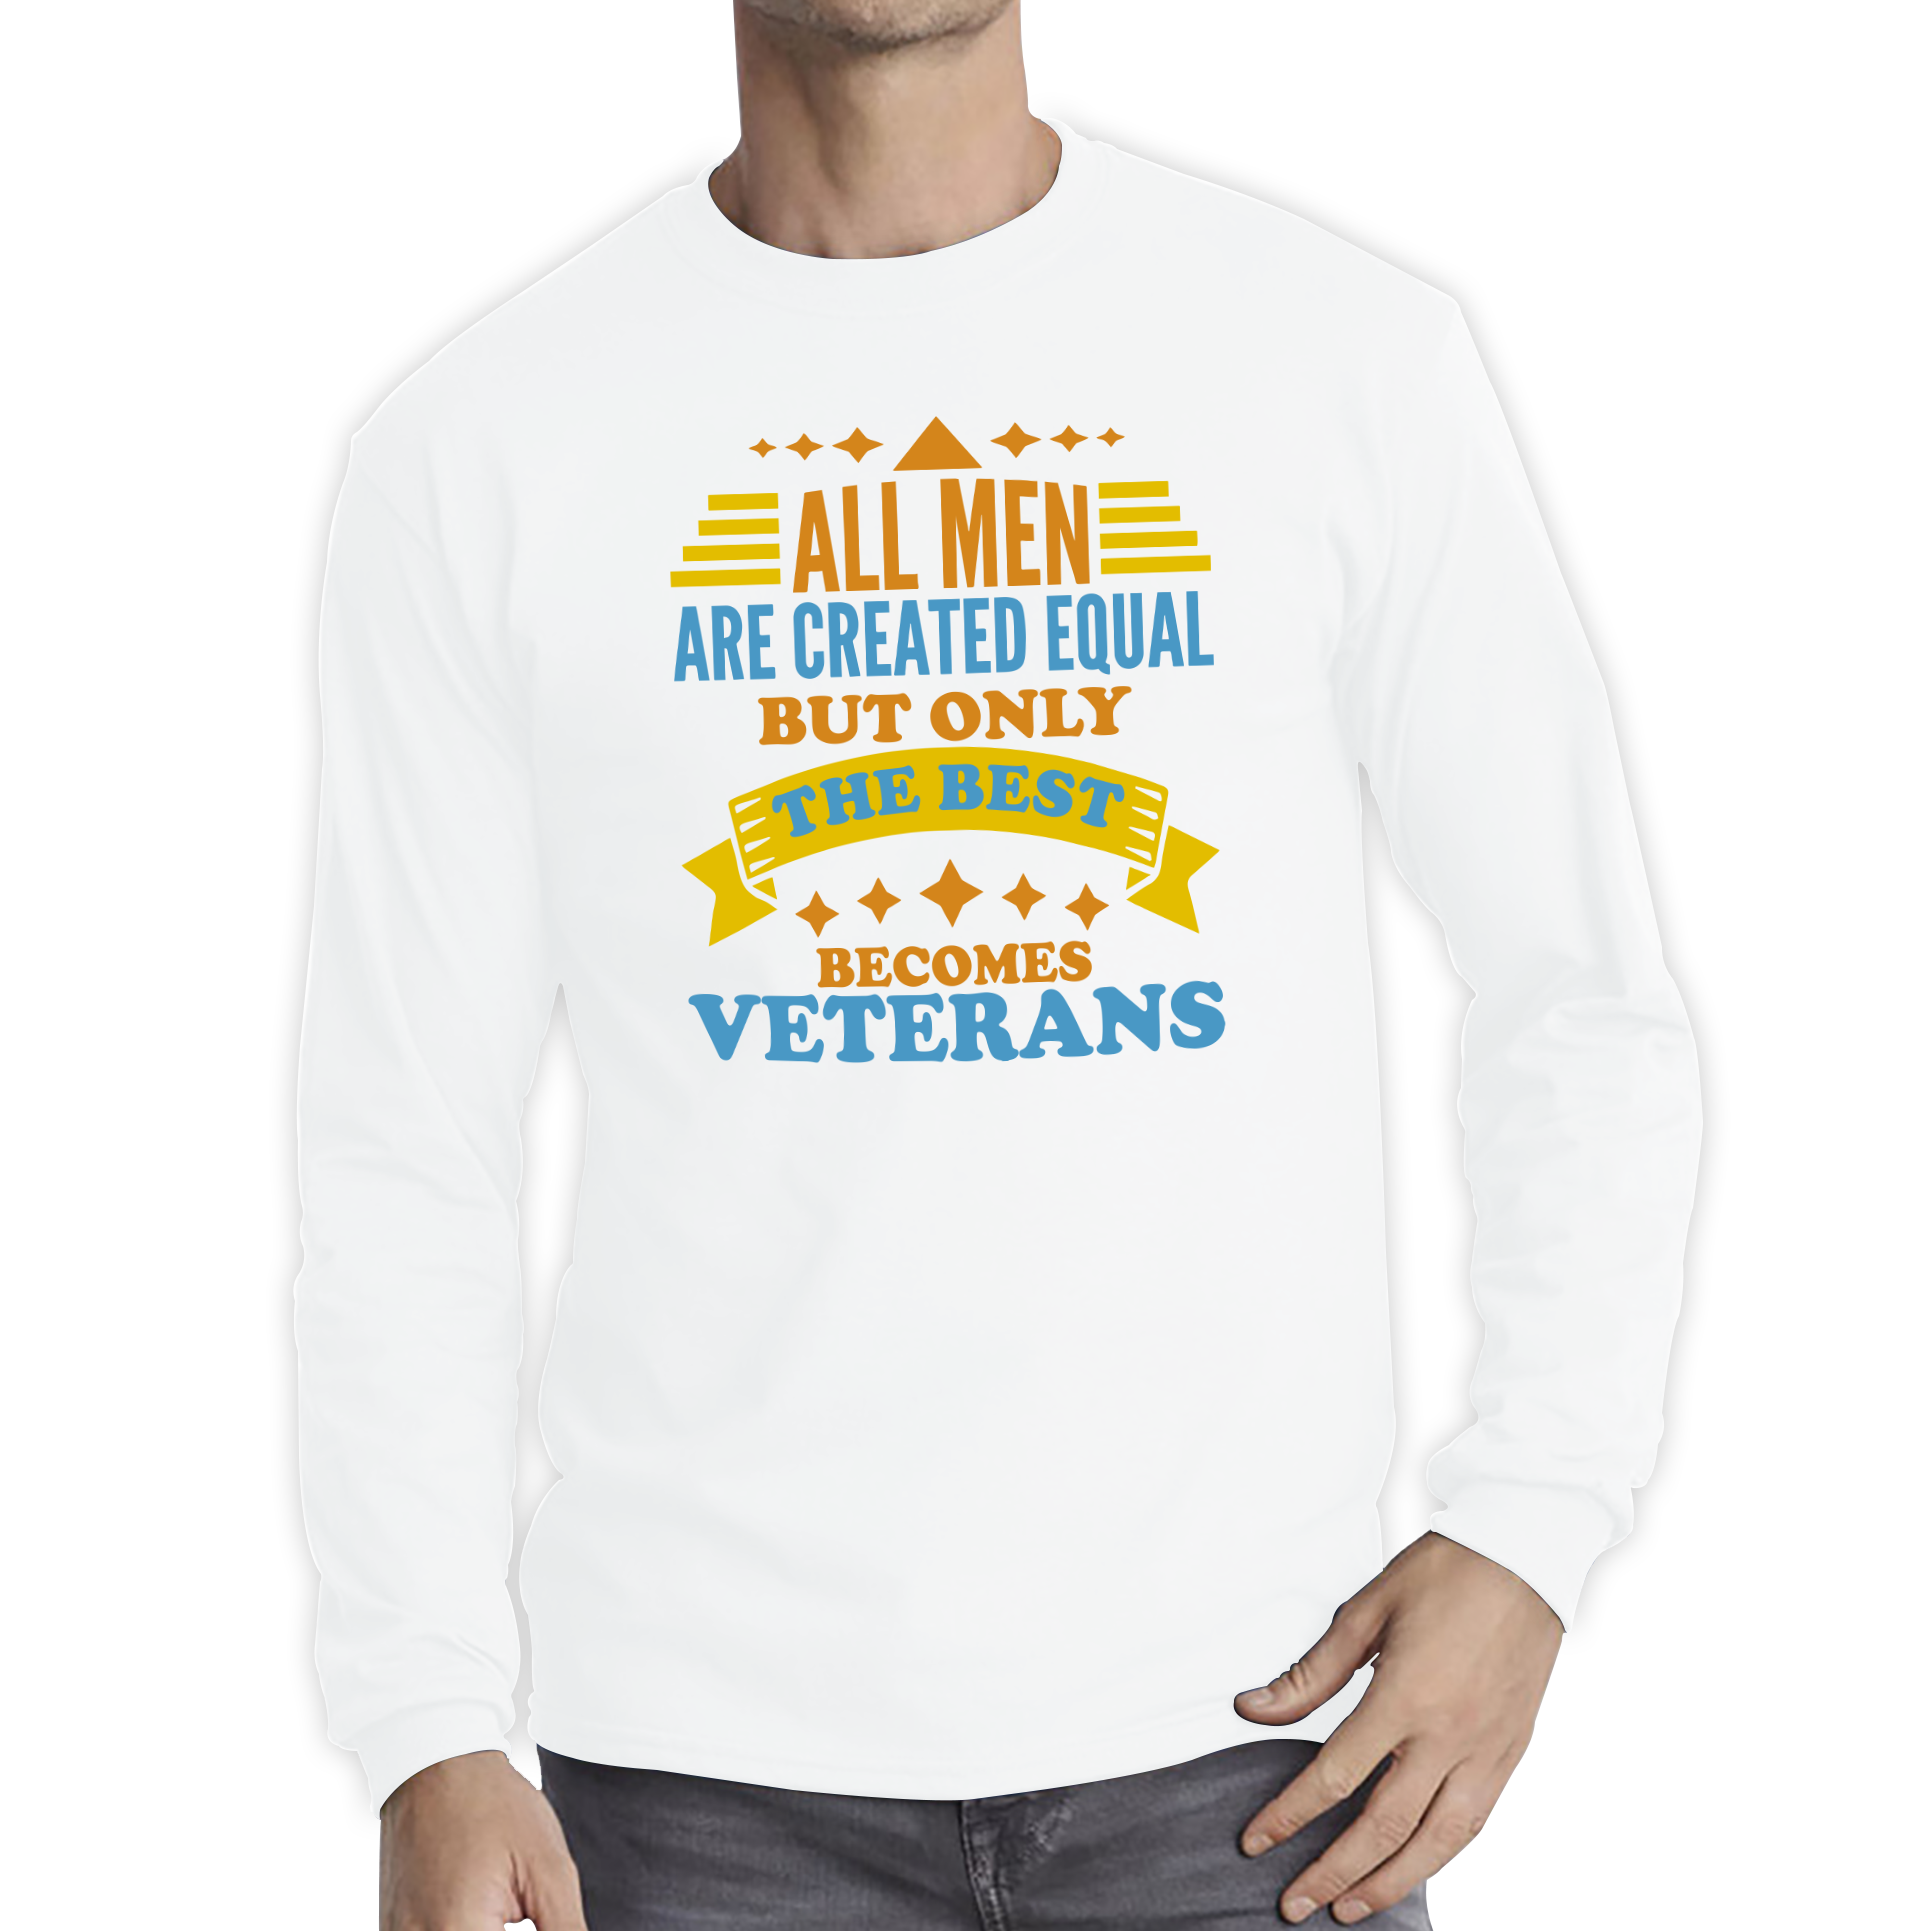 All Men Are Created Equal But Only The Best Becomes Veterans Long Sleeve T Shirt